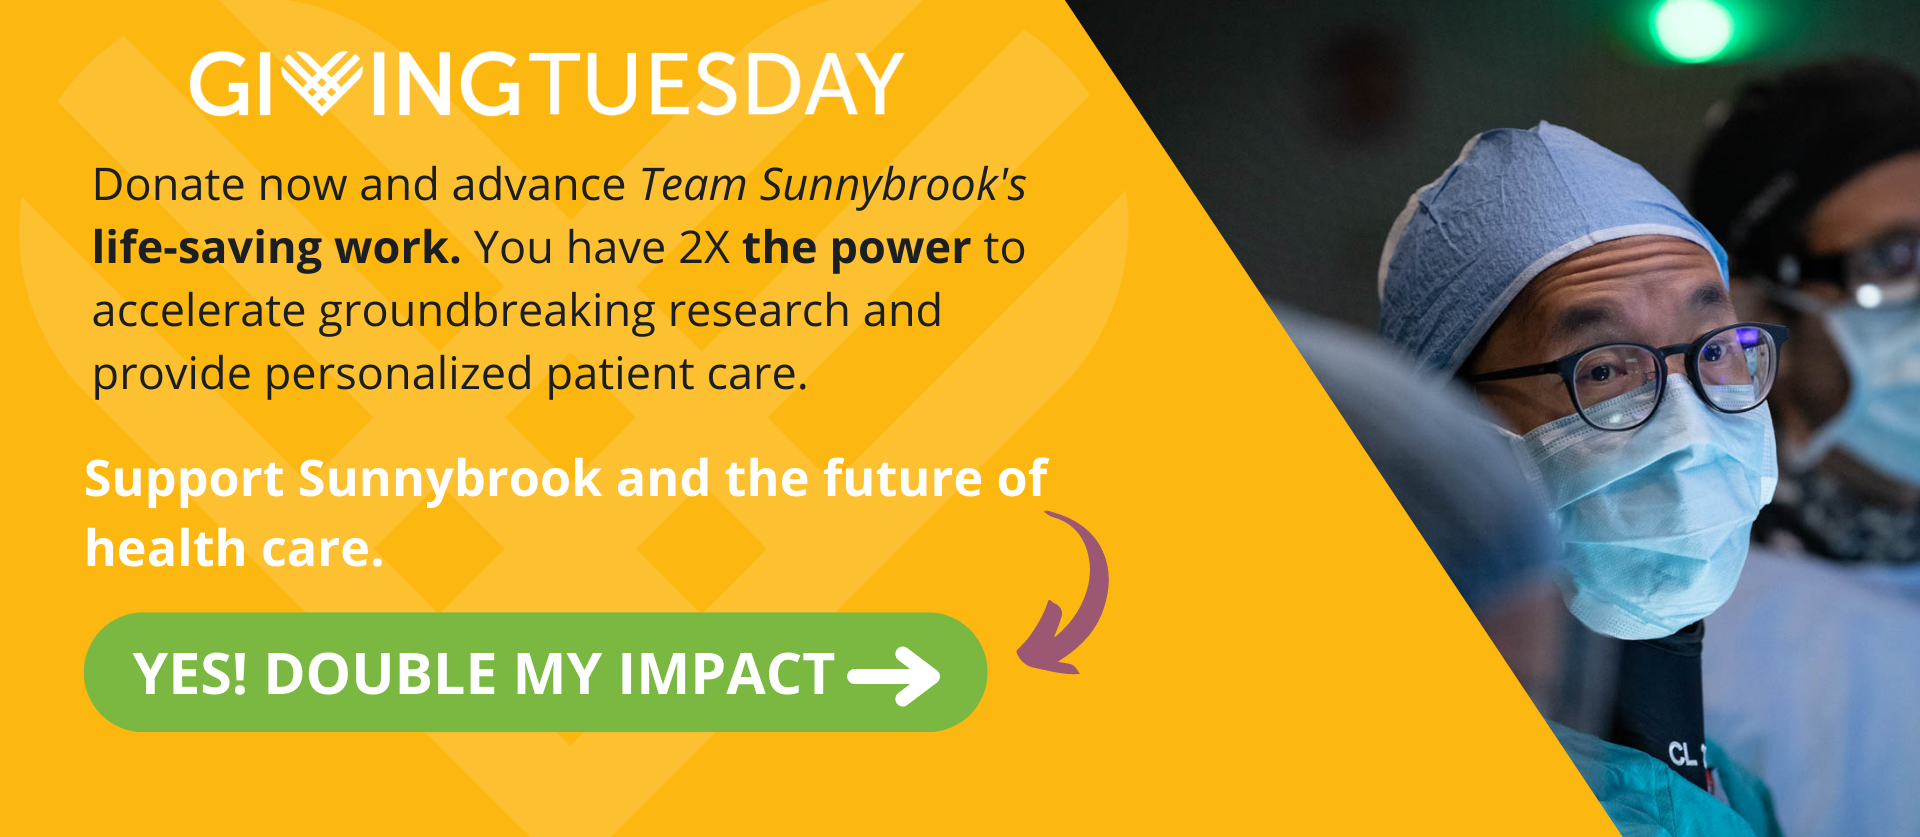 Giving Tuesday. Support Sunnybrook and the future of health care